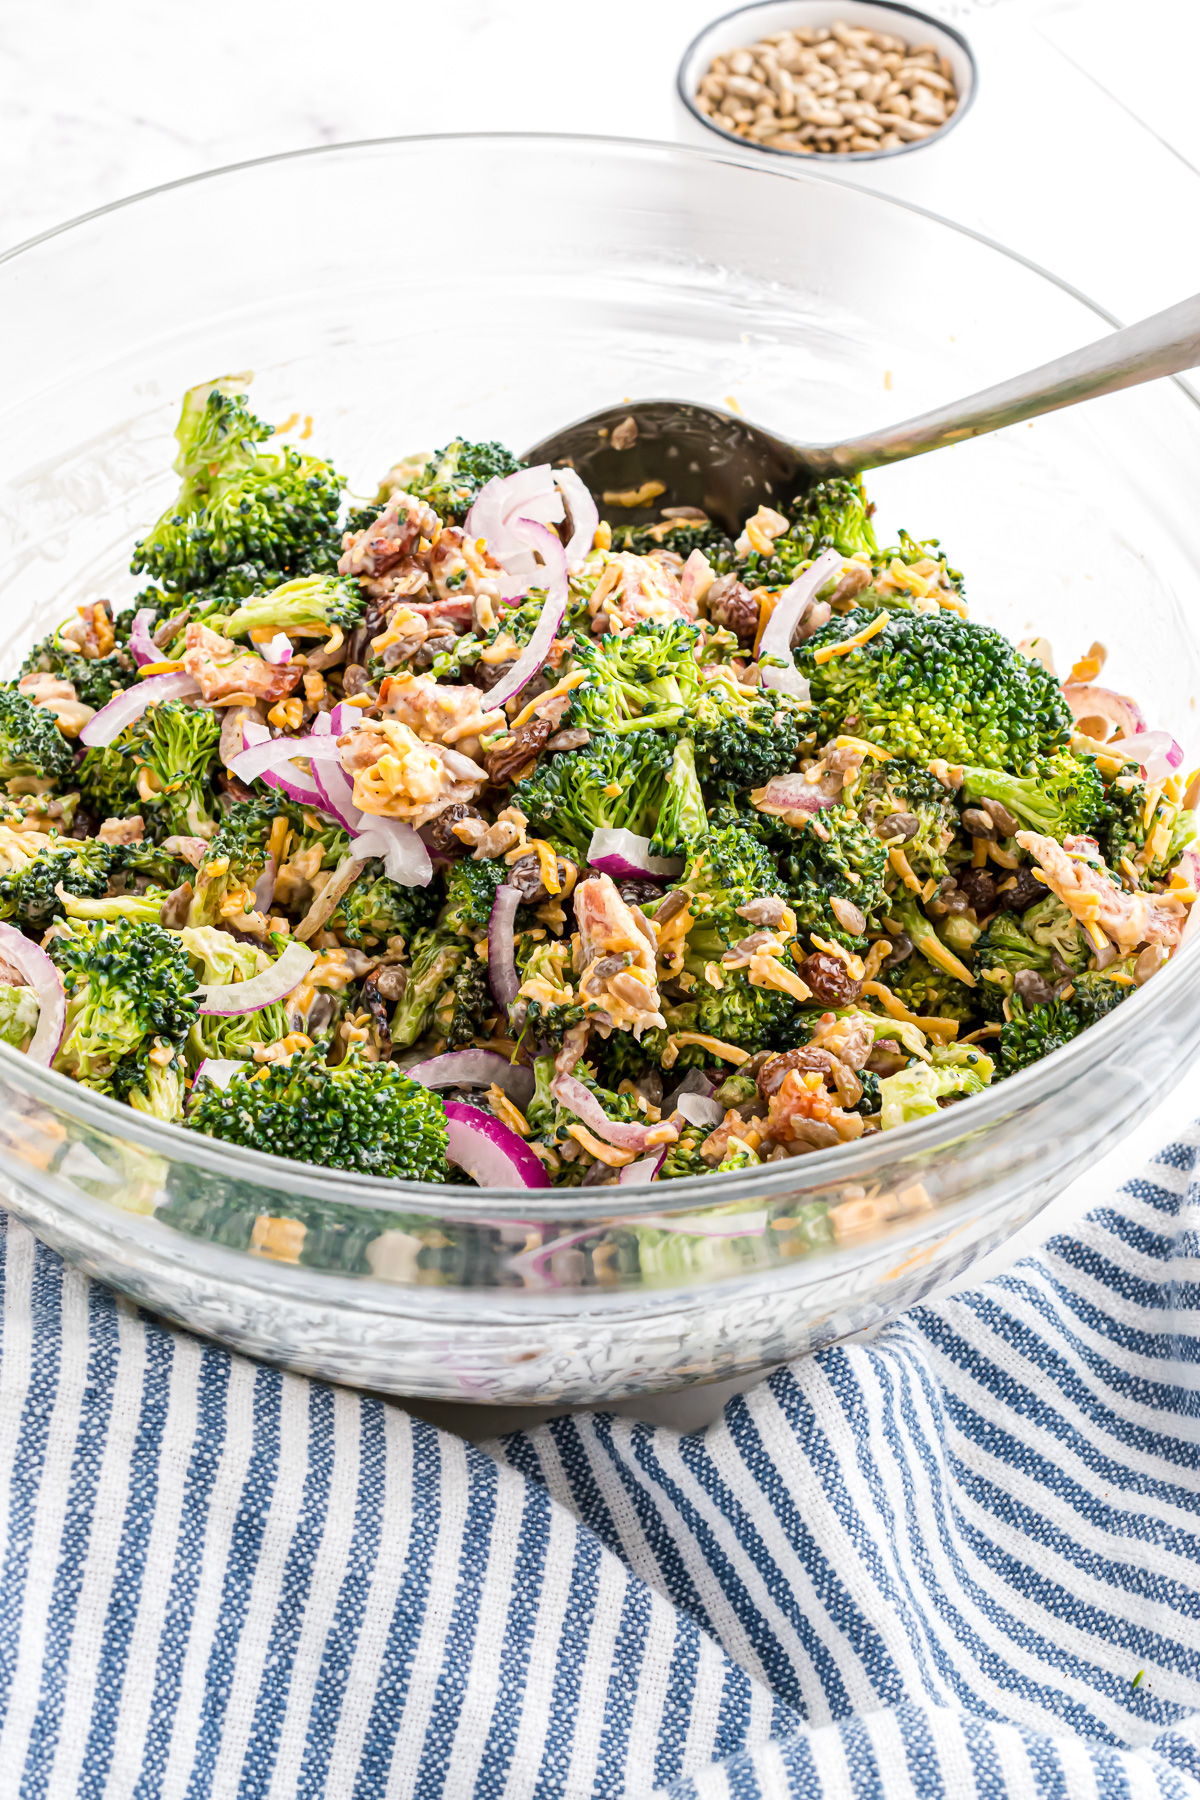 A large serving bowl filled with broccoli salad and a large serving spoon sticking out of the salad.